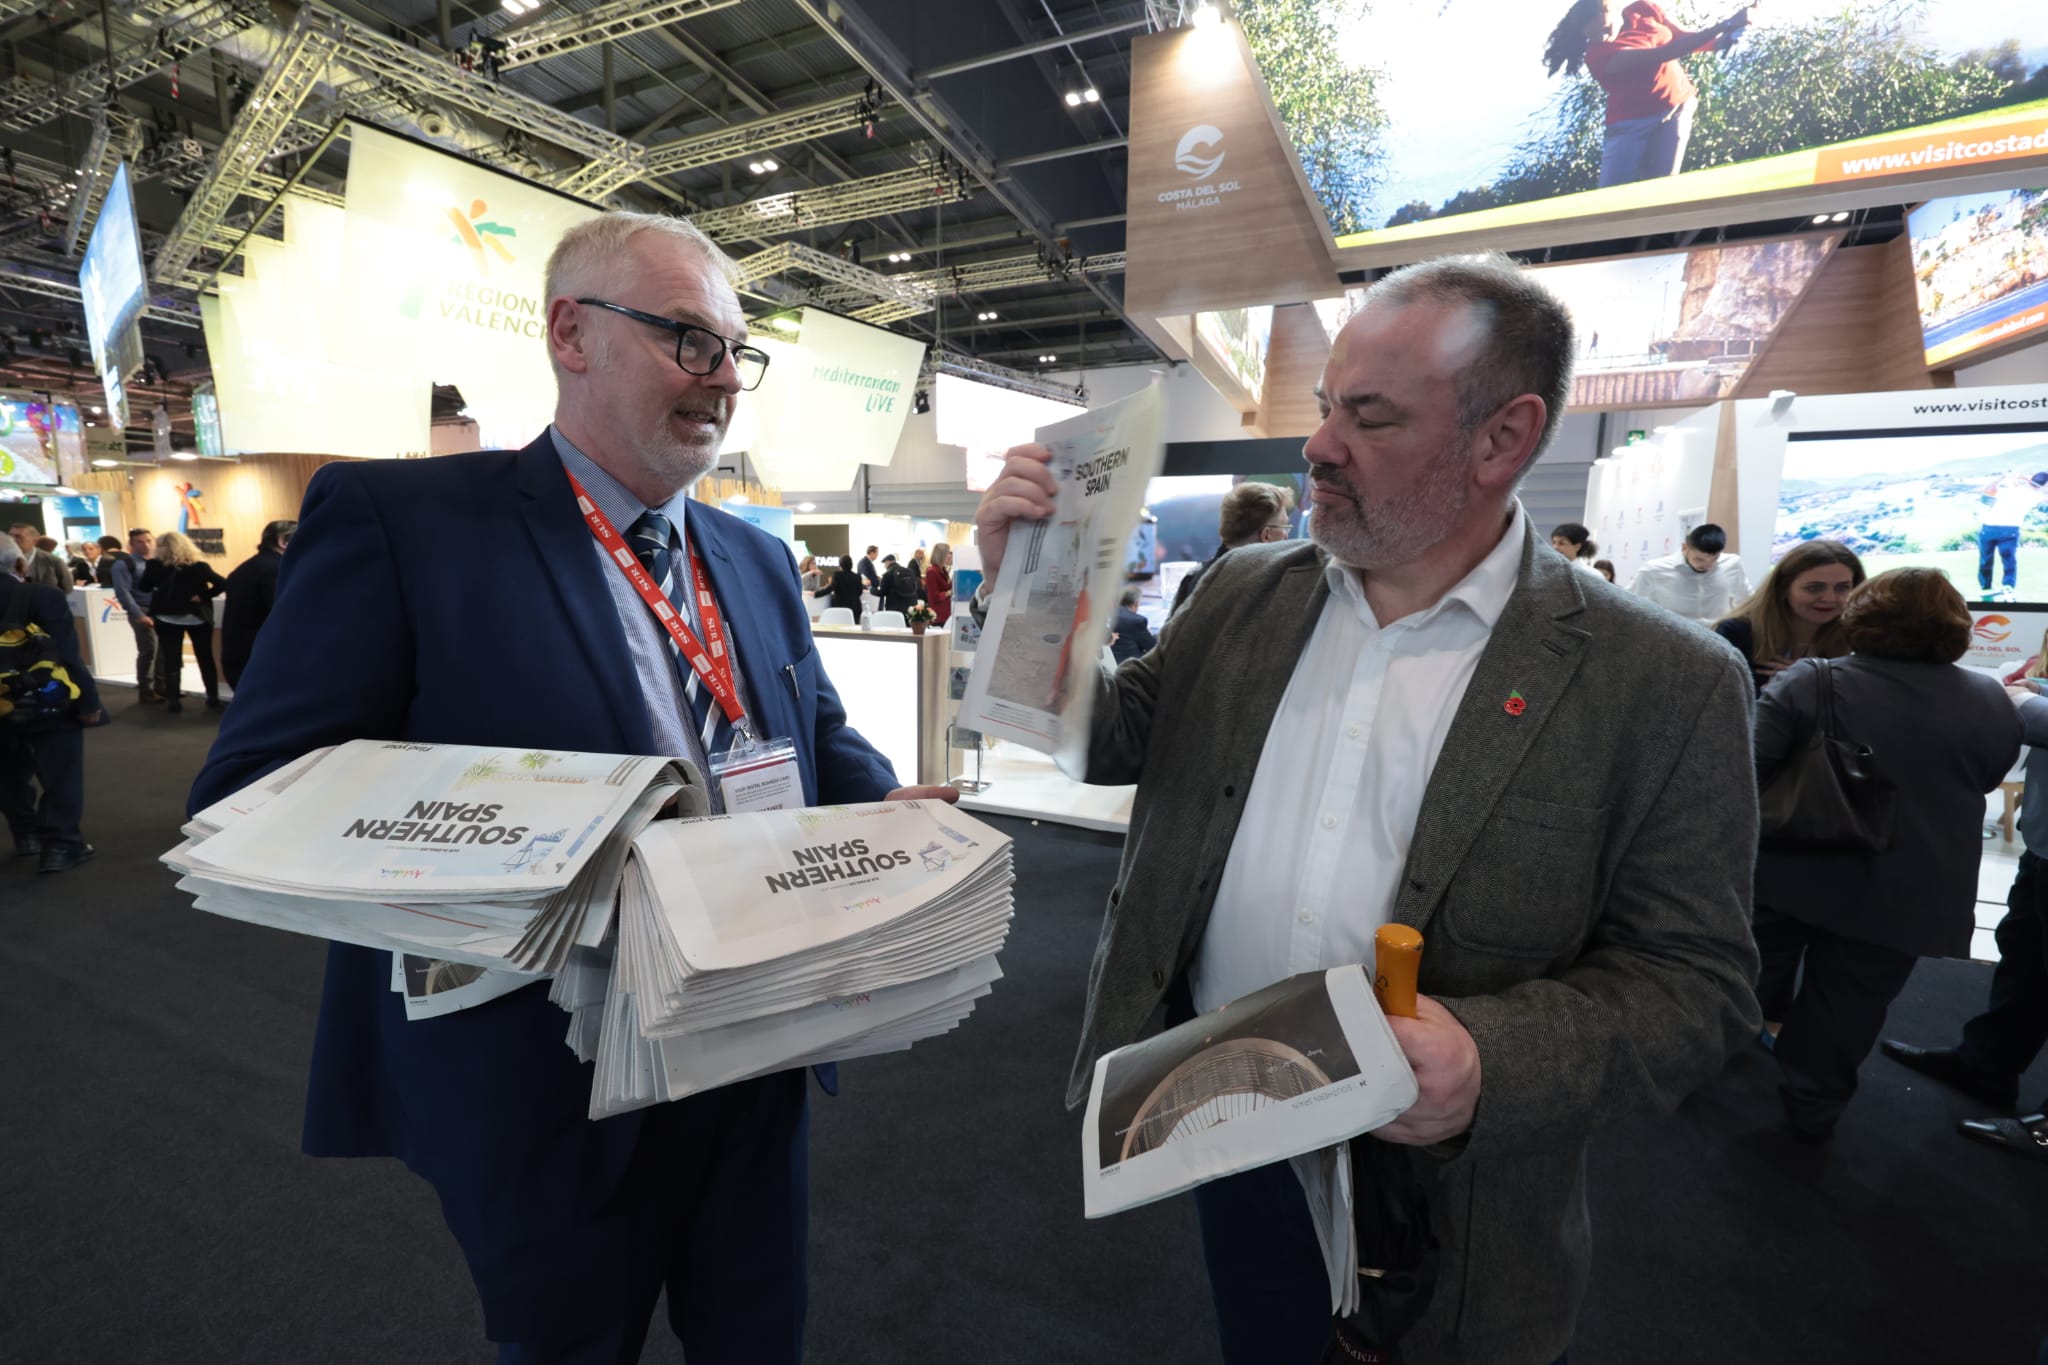 Andalucía, the Costa del Sol, Malaga and the main tourist resorts of southern Spain are the ExCel centre London this week with one common aim: to make sure 2023 is the year of the total recovery of British tourism